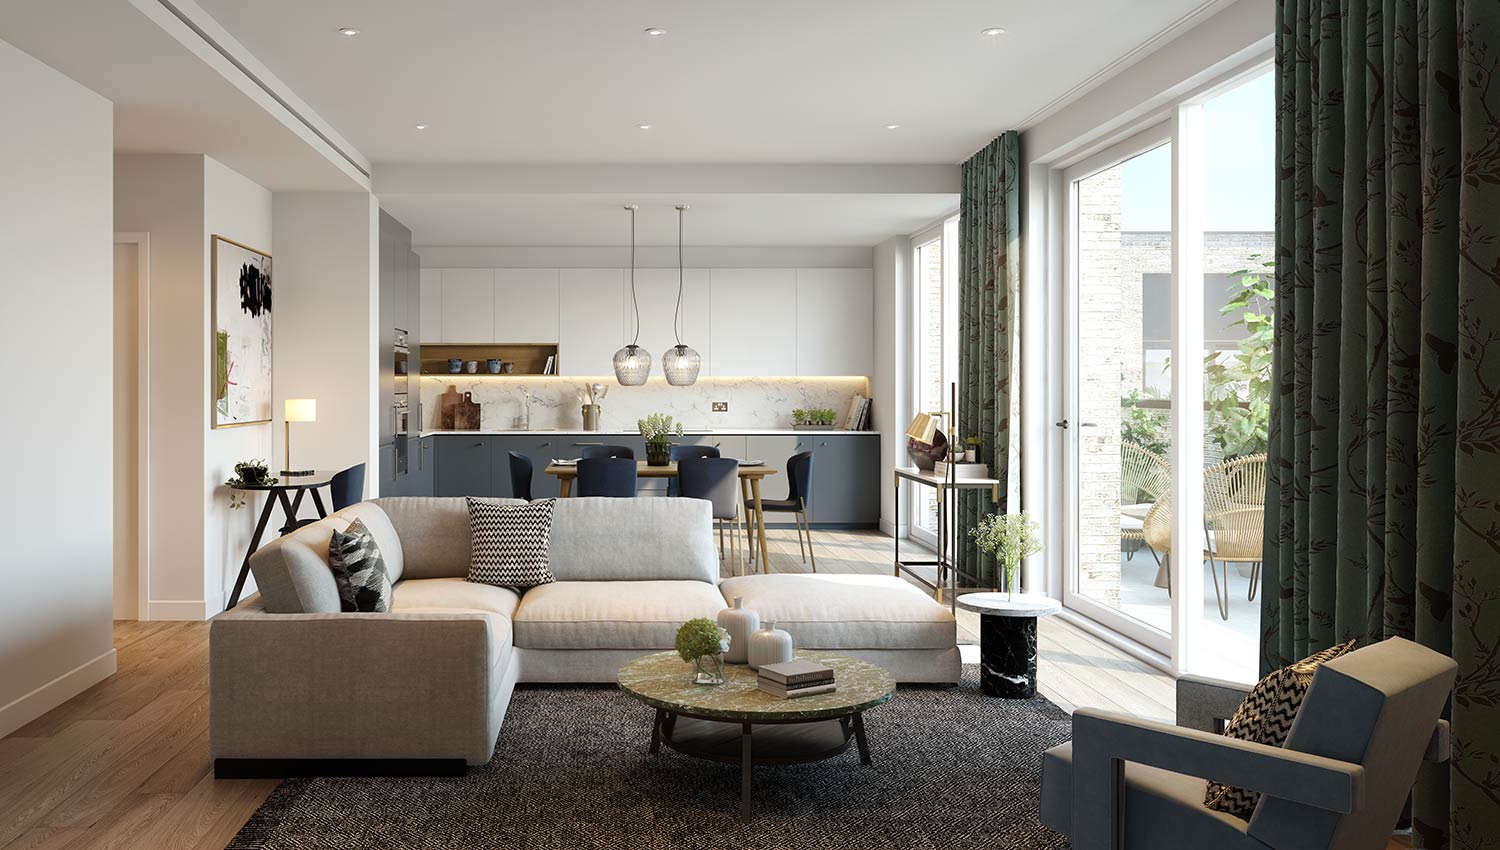 Carrick Yard | Apartments in Lisson Grove, NW8 London